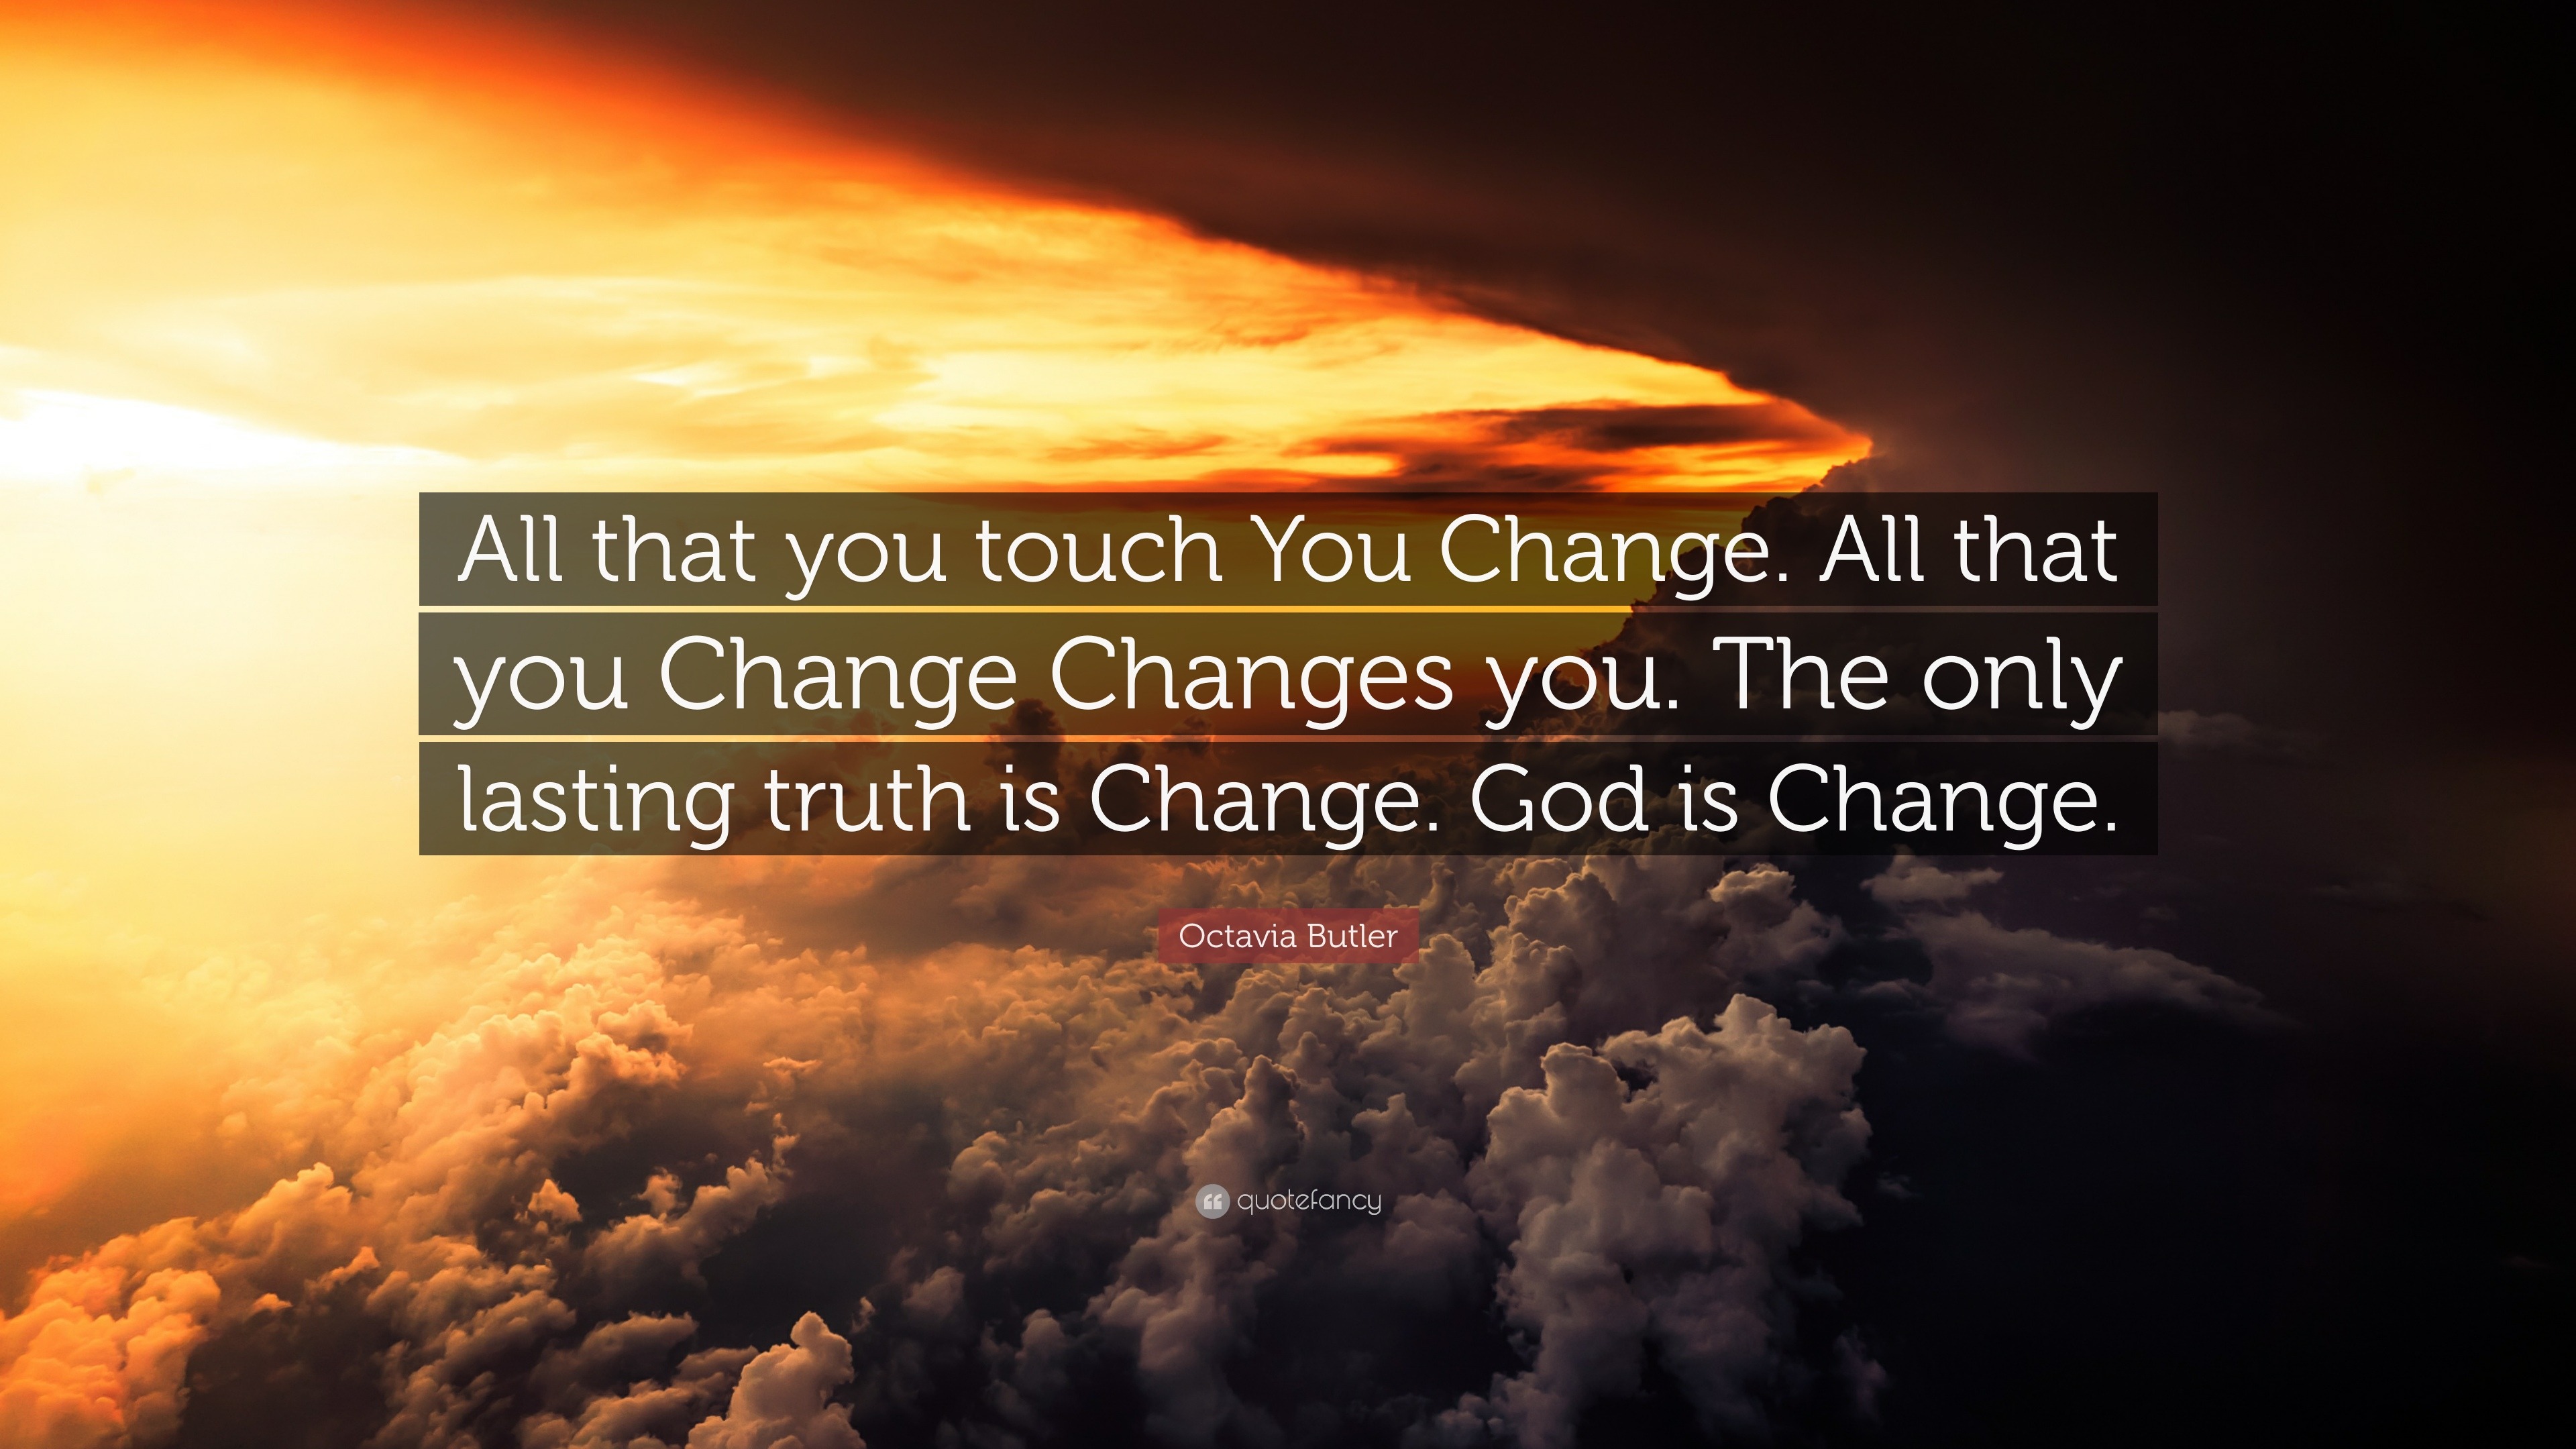 Octavia Butler Quote: “All that you touch You Change. All that you